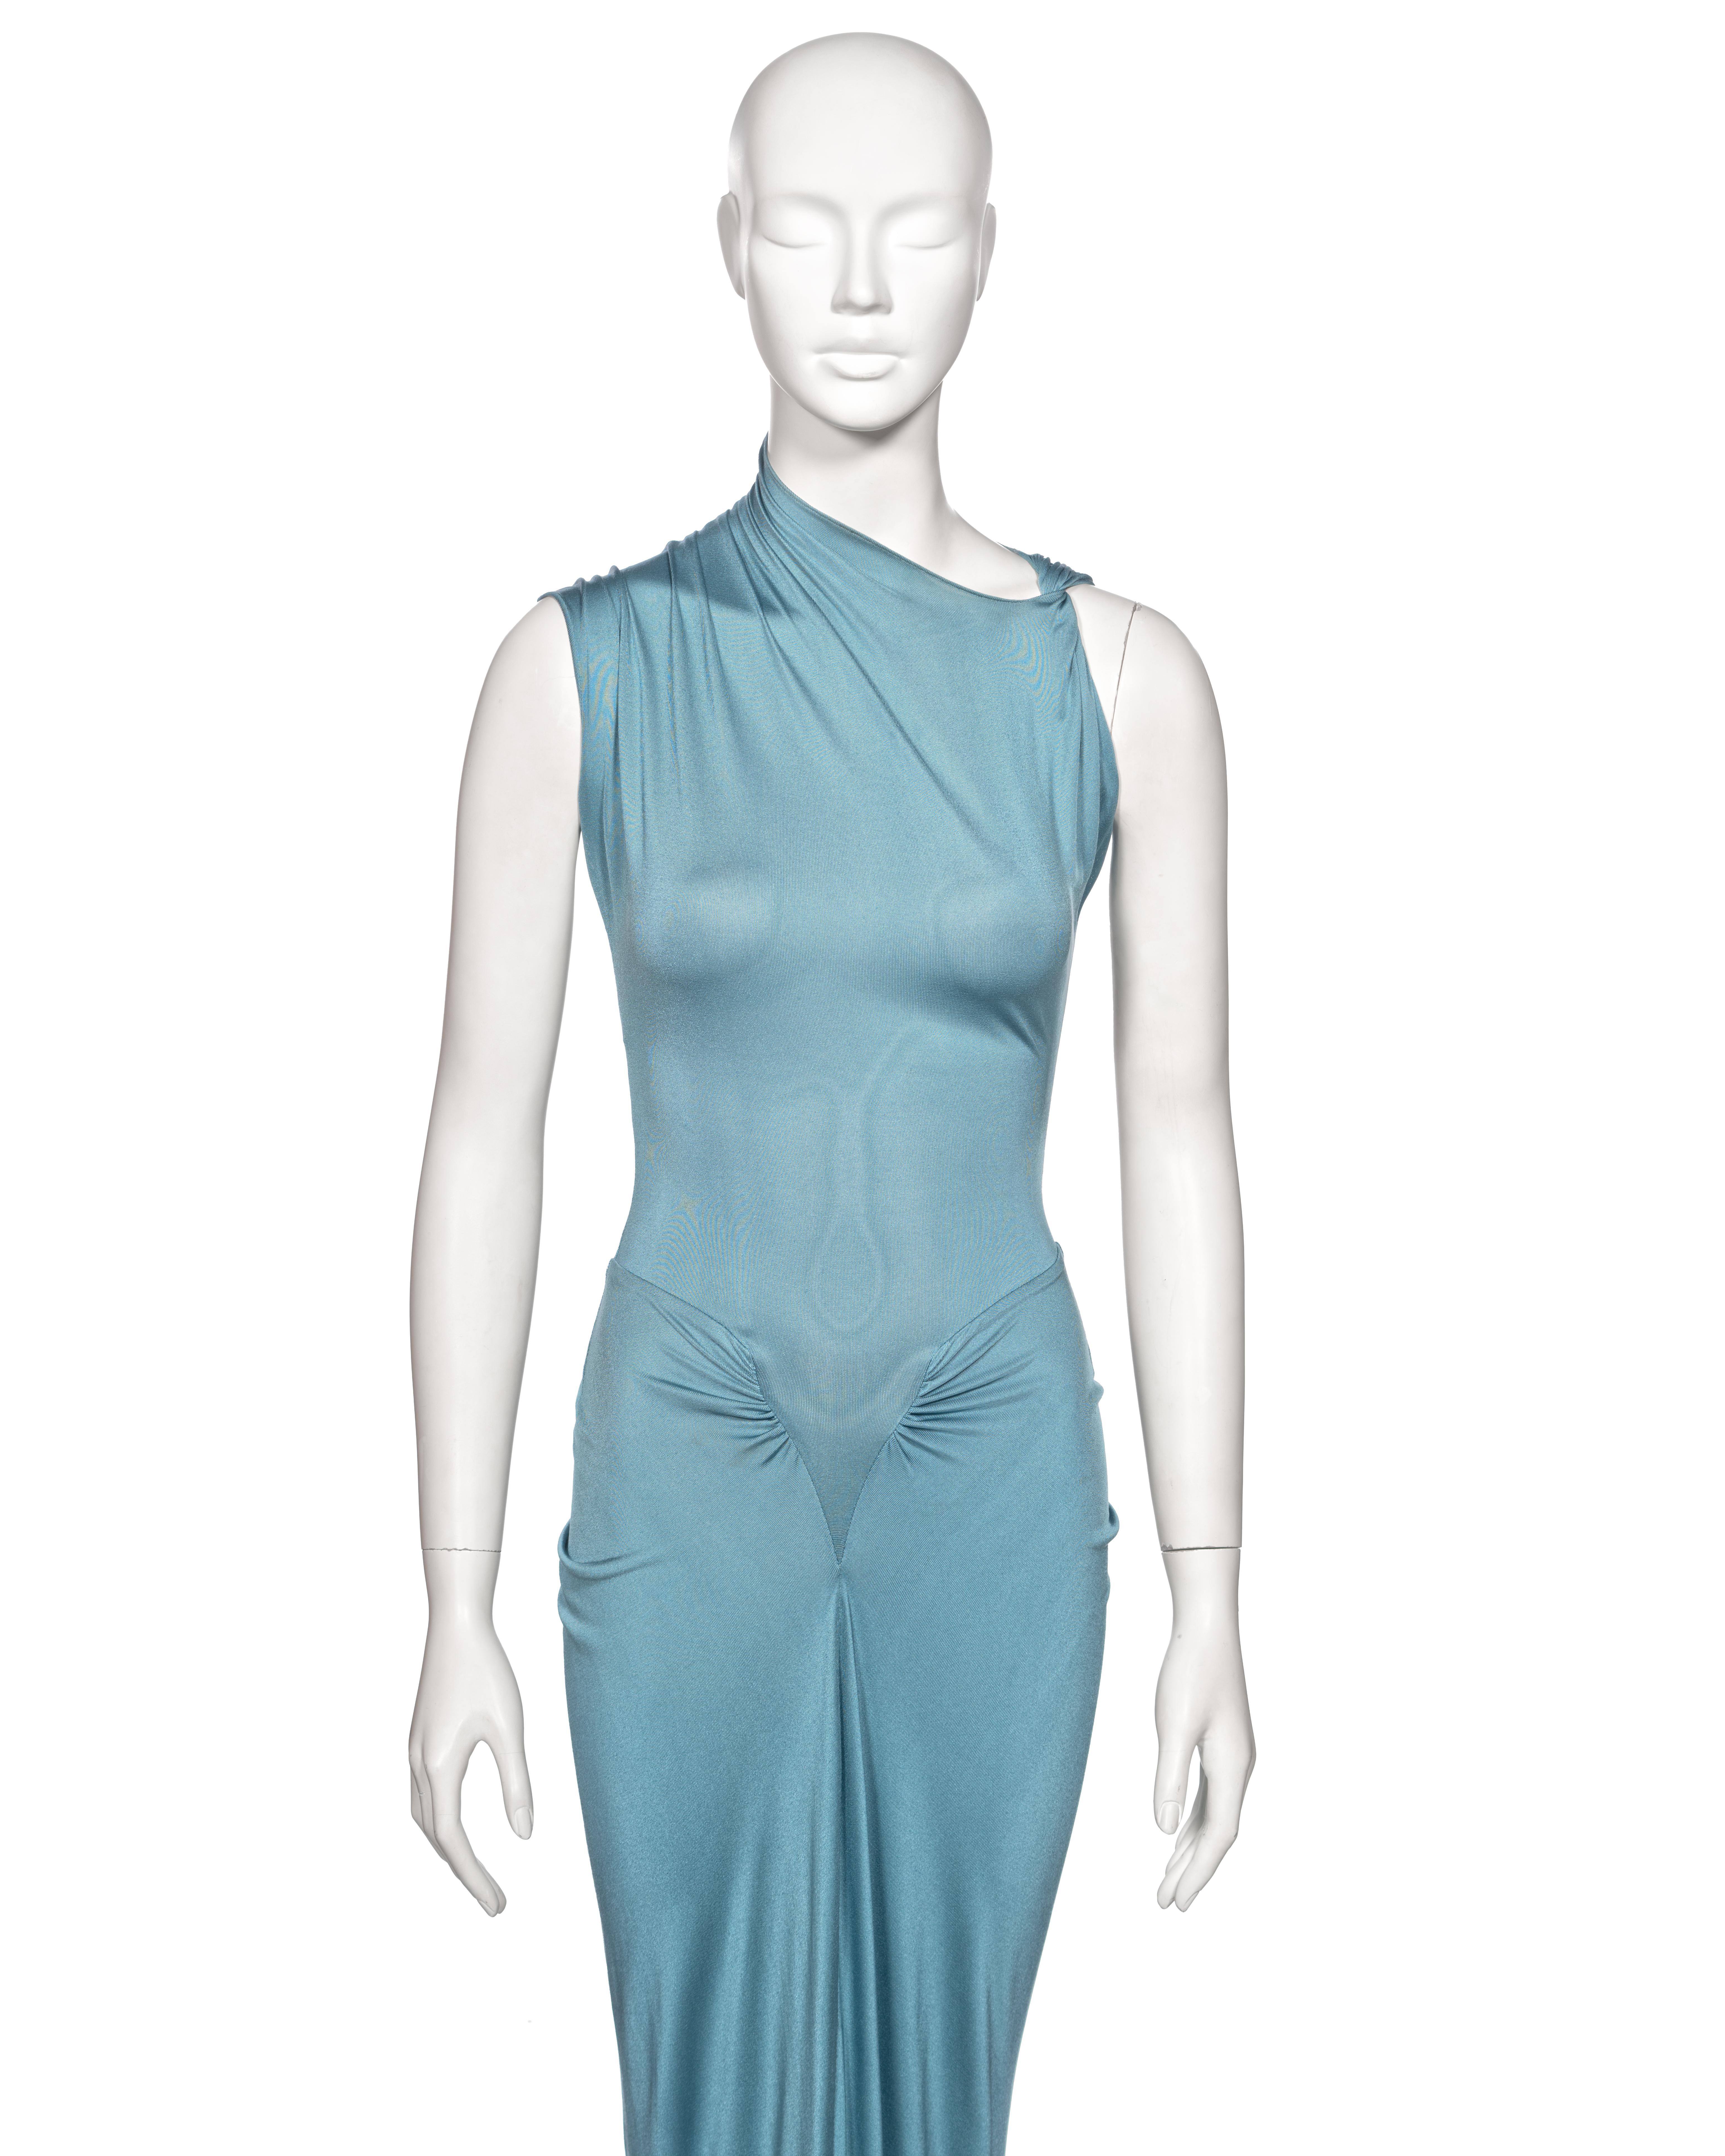 Christian Dior by John Galliano Powder Blue Silk Jersey Evening Dress, ss 2000 In Good Condition For Sale In London, GB